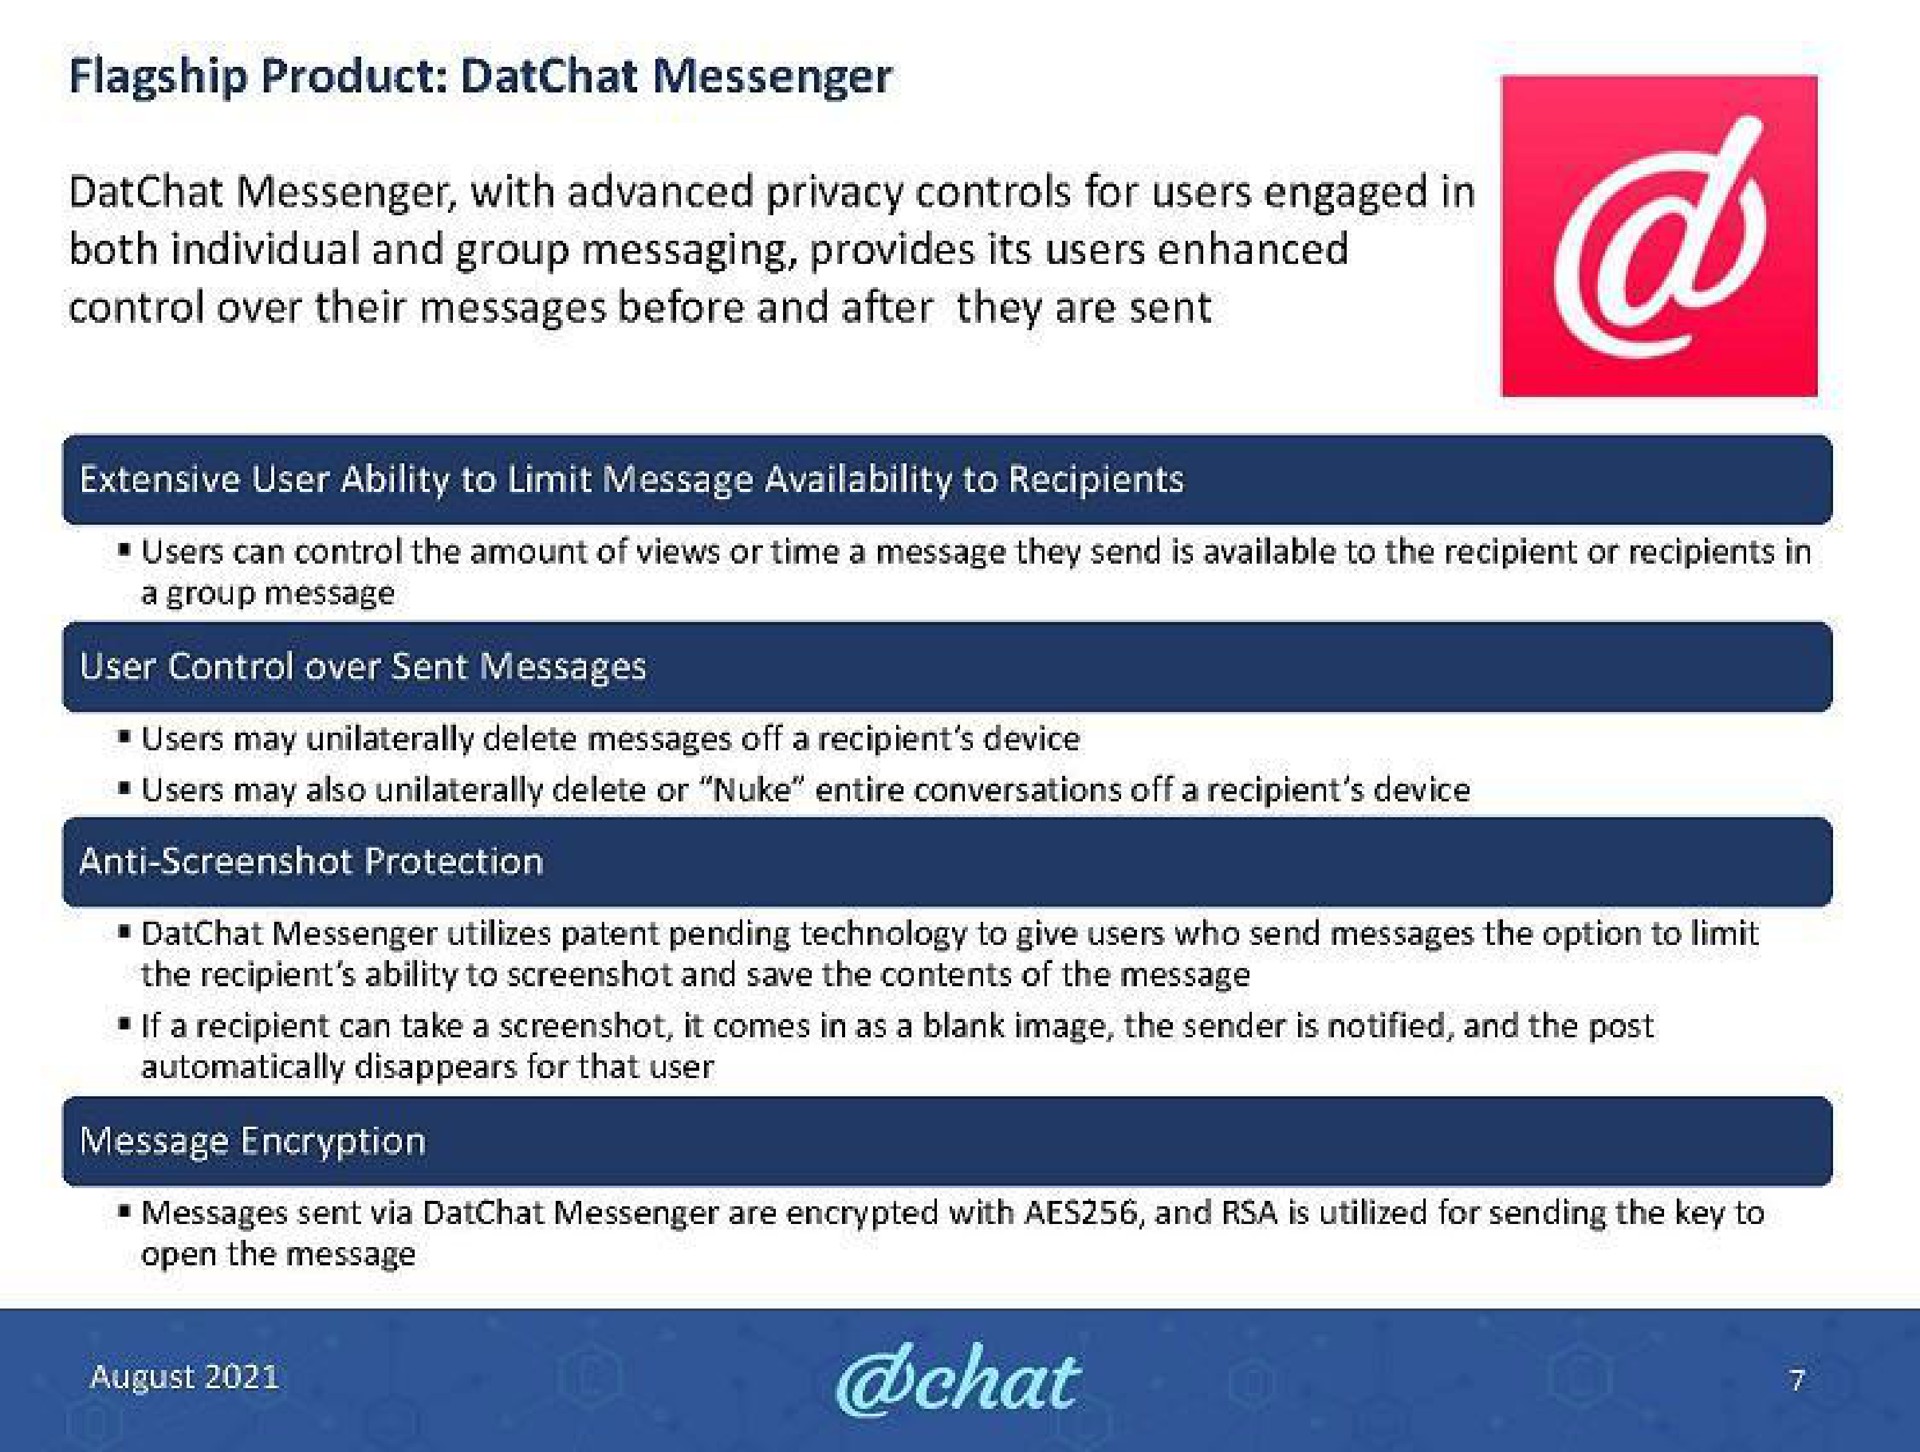 flagship product messenger messenger with advanced privacy controls for users engaged in both individual and group messaging provides its users enhanced control over their messages before and after they are sent | DatChat